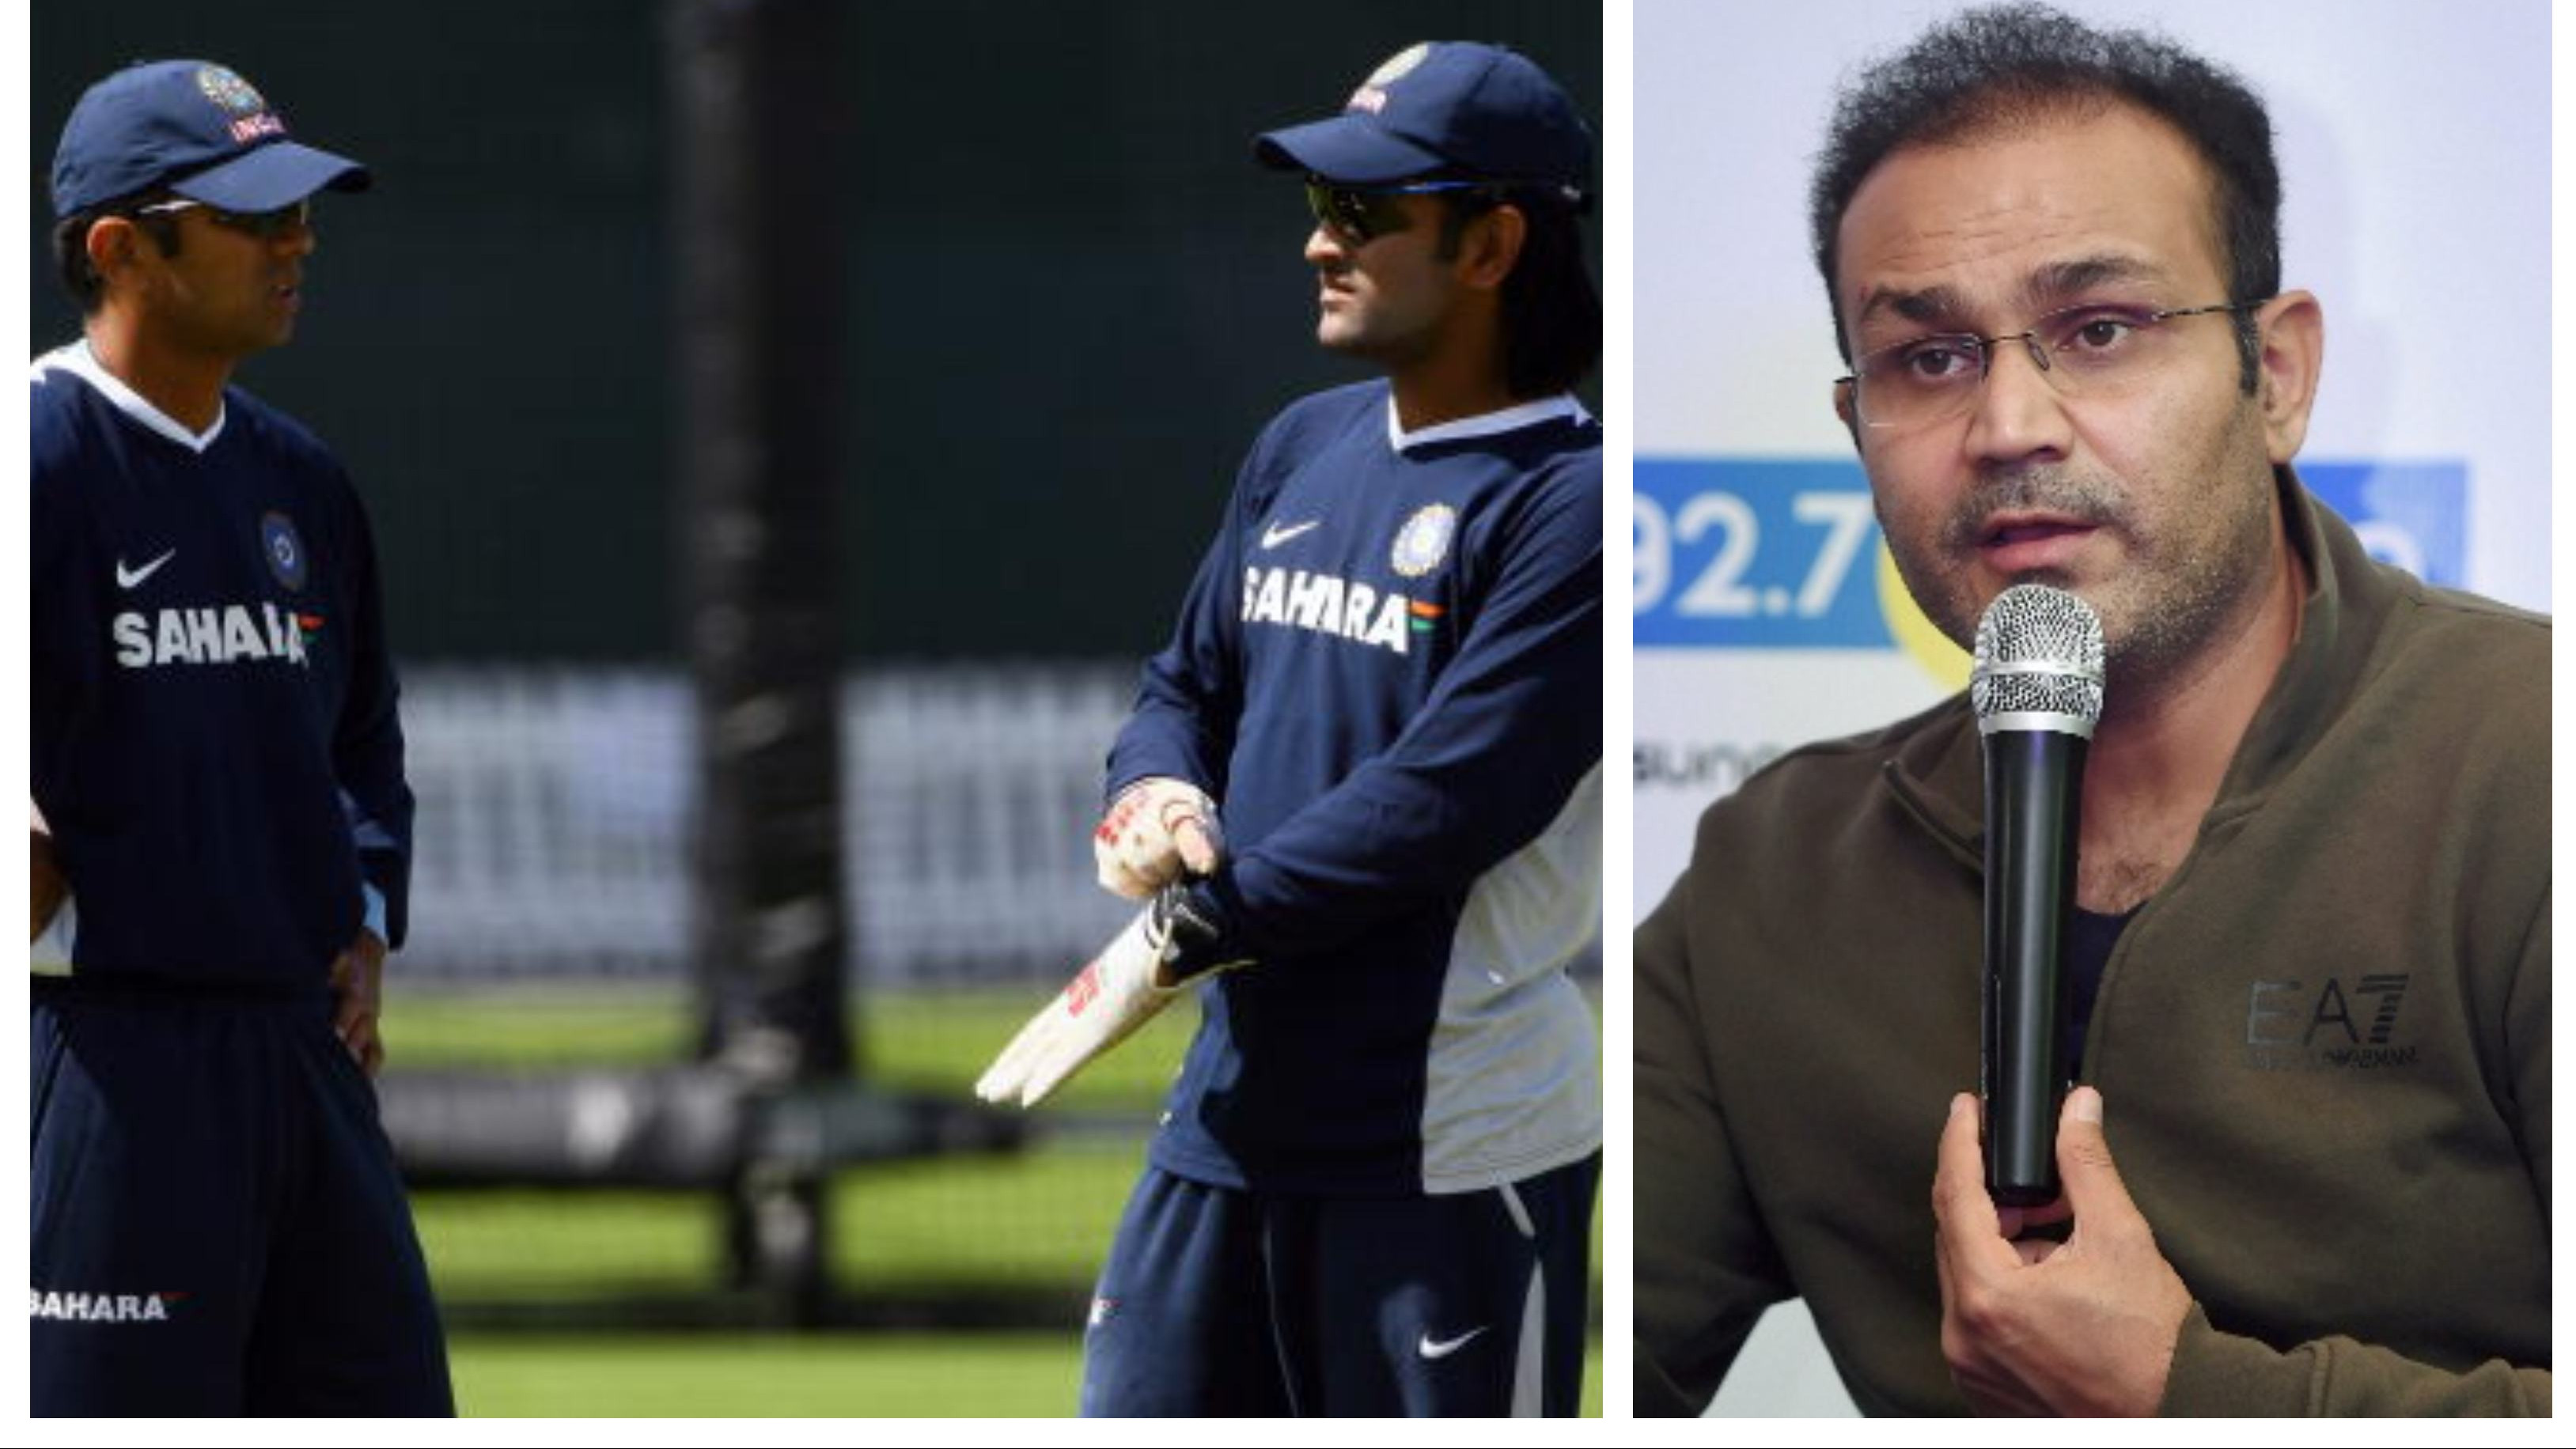 WATCH: Virender Sehwag recalls instance when Rahul Dravid got angry on MS Dhoni during a Pakistan tour